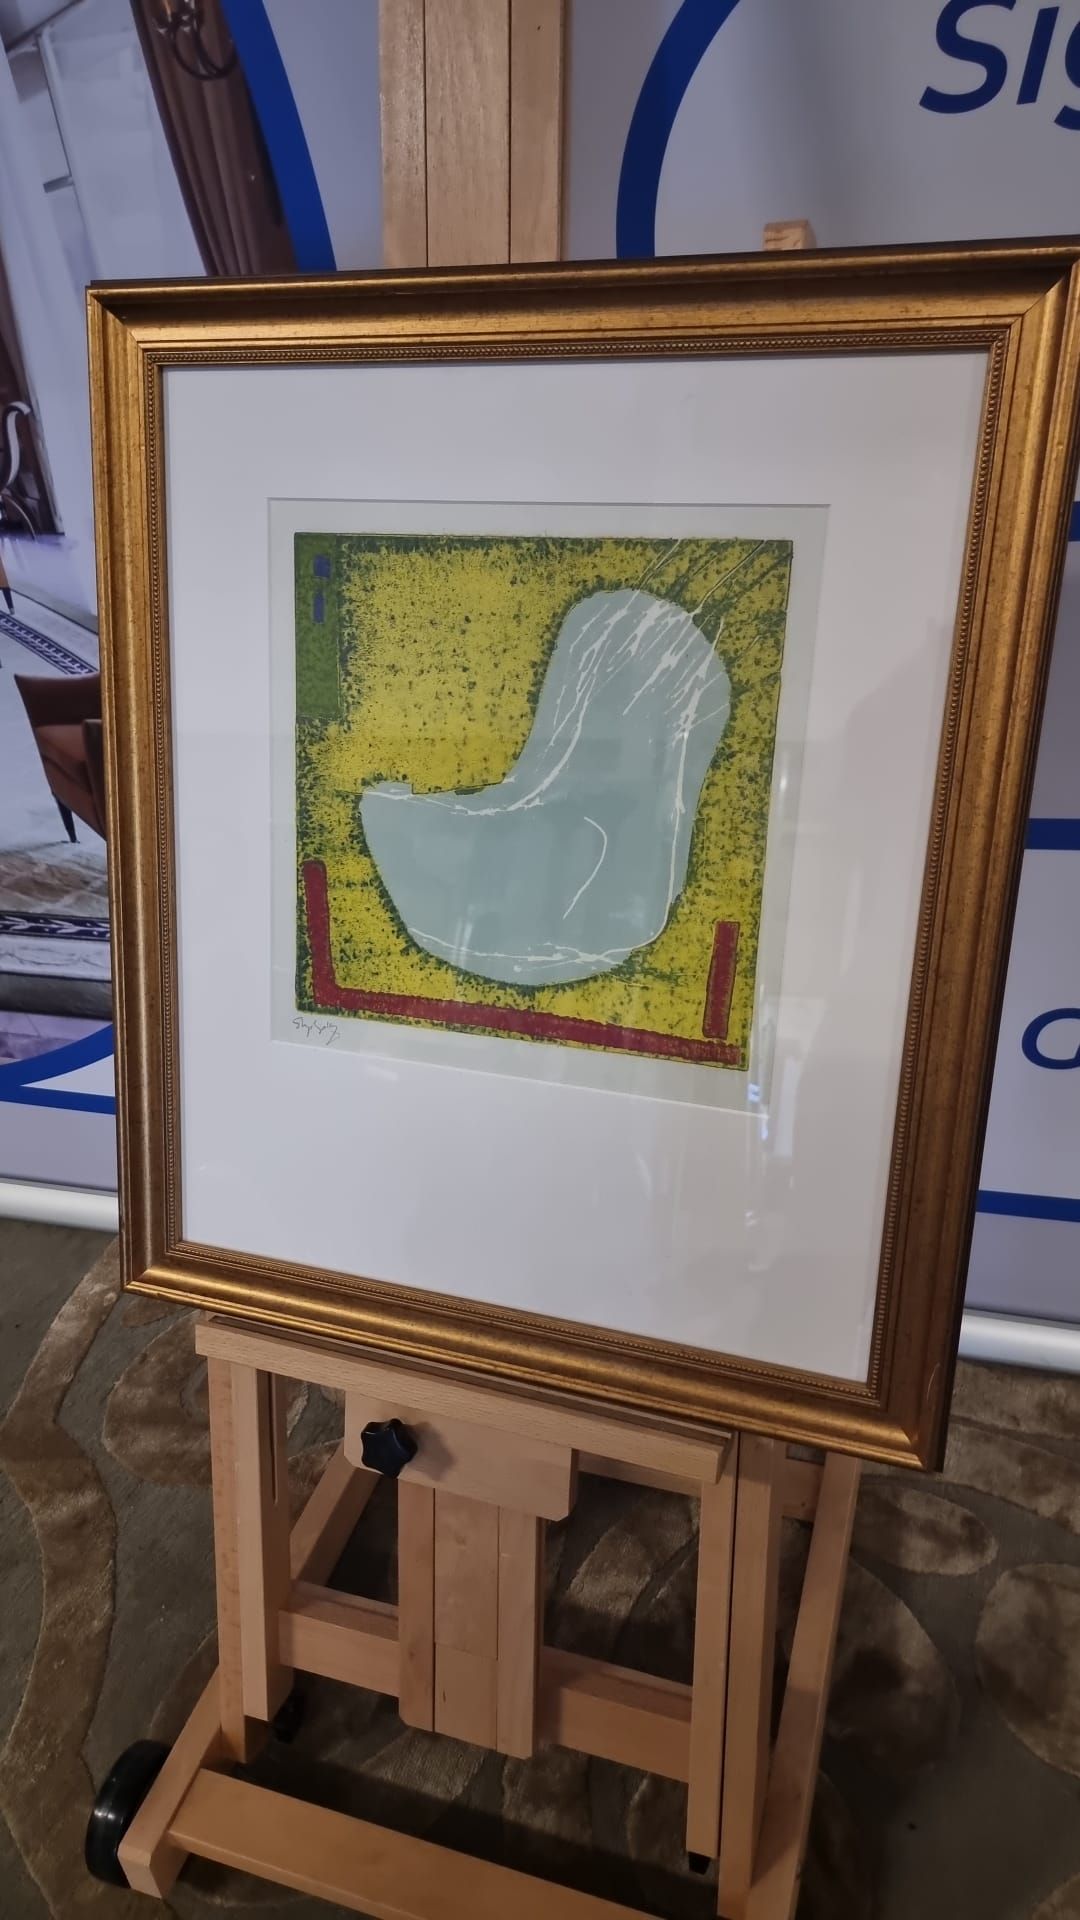 Framed Artwork Abstract Signed But Indistinct 58 x 68cm (A05) Framed Artwork Abstract Signed But